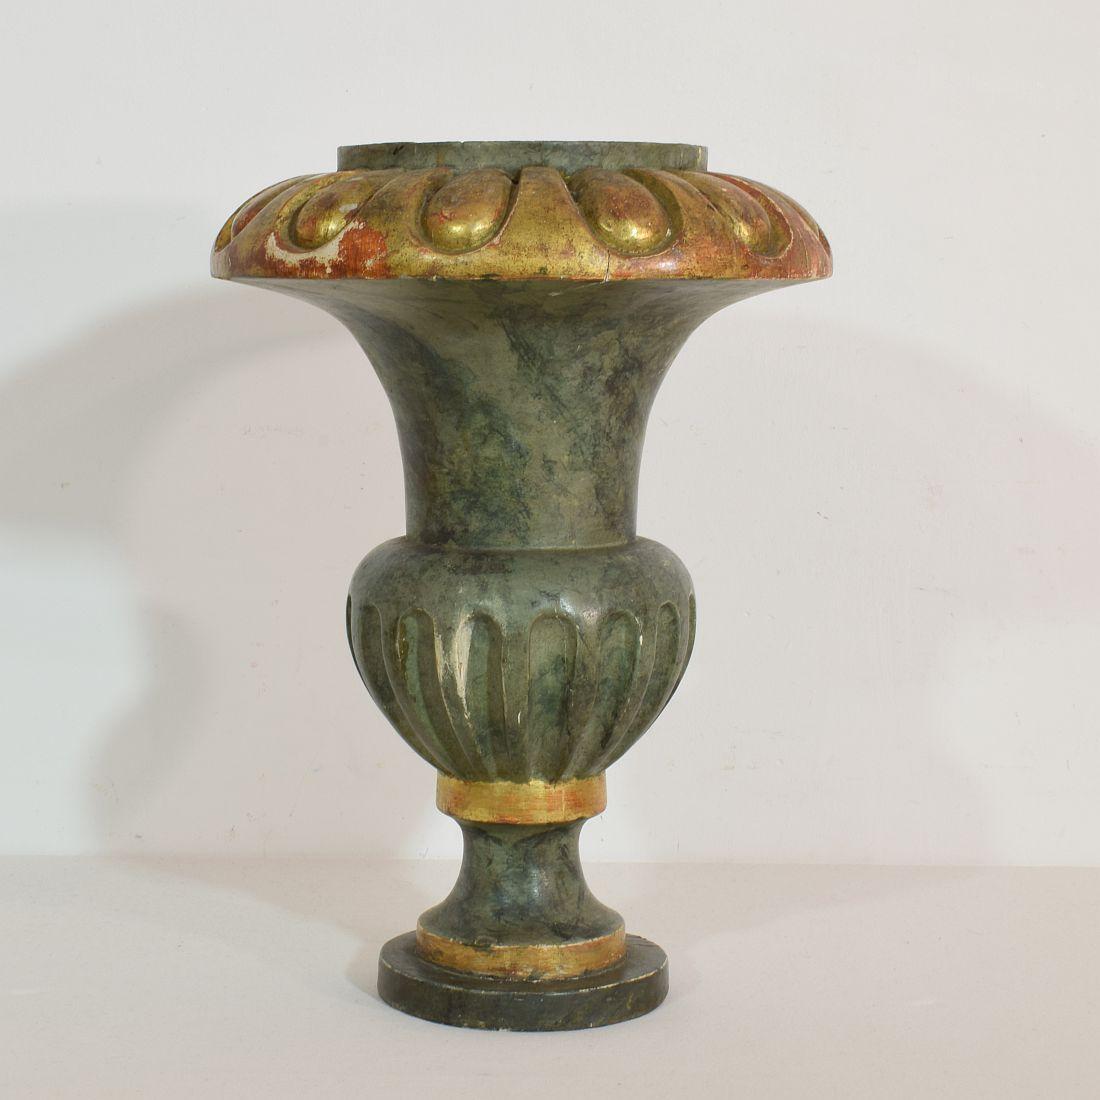 Beautiful wooden vase with its original gilding and color, Italy, circa 1880-1900.
Weathered.